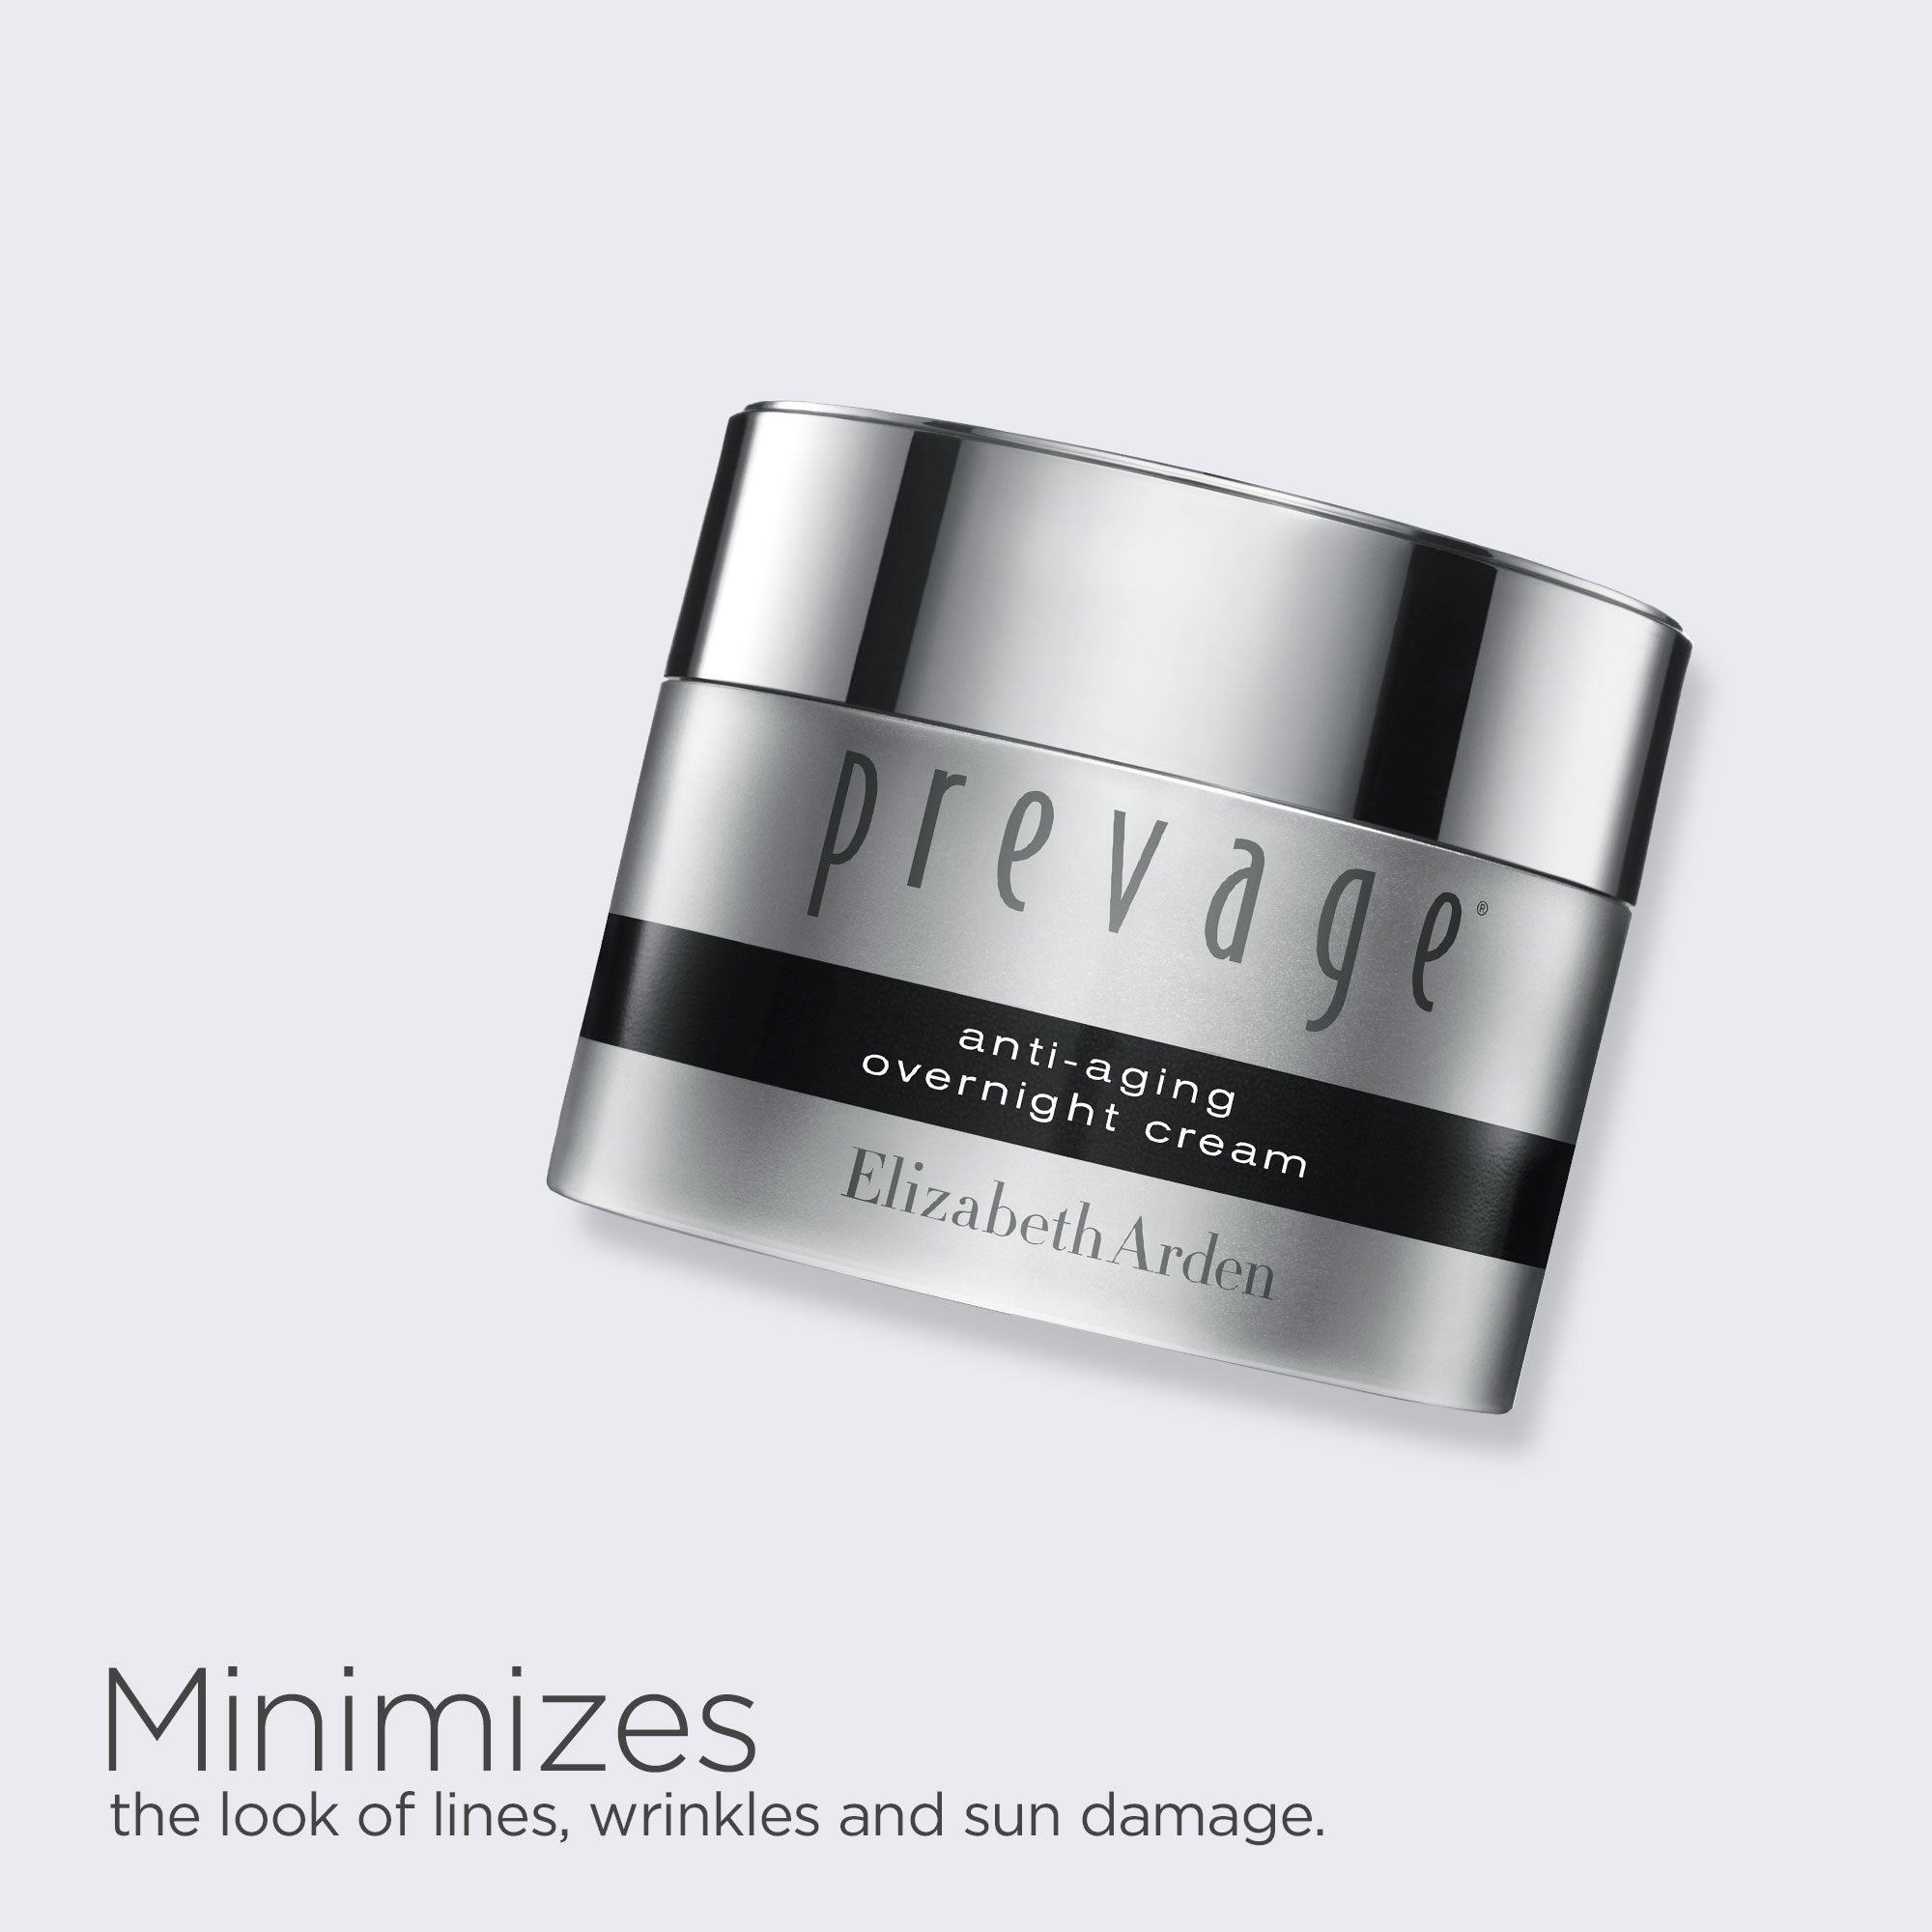 Prevage Night Cream minimizes the look of lines, wrinkles and sun damage.